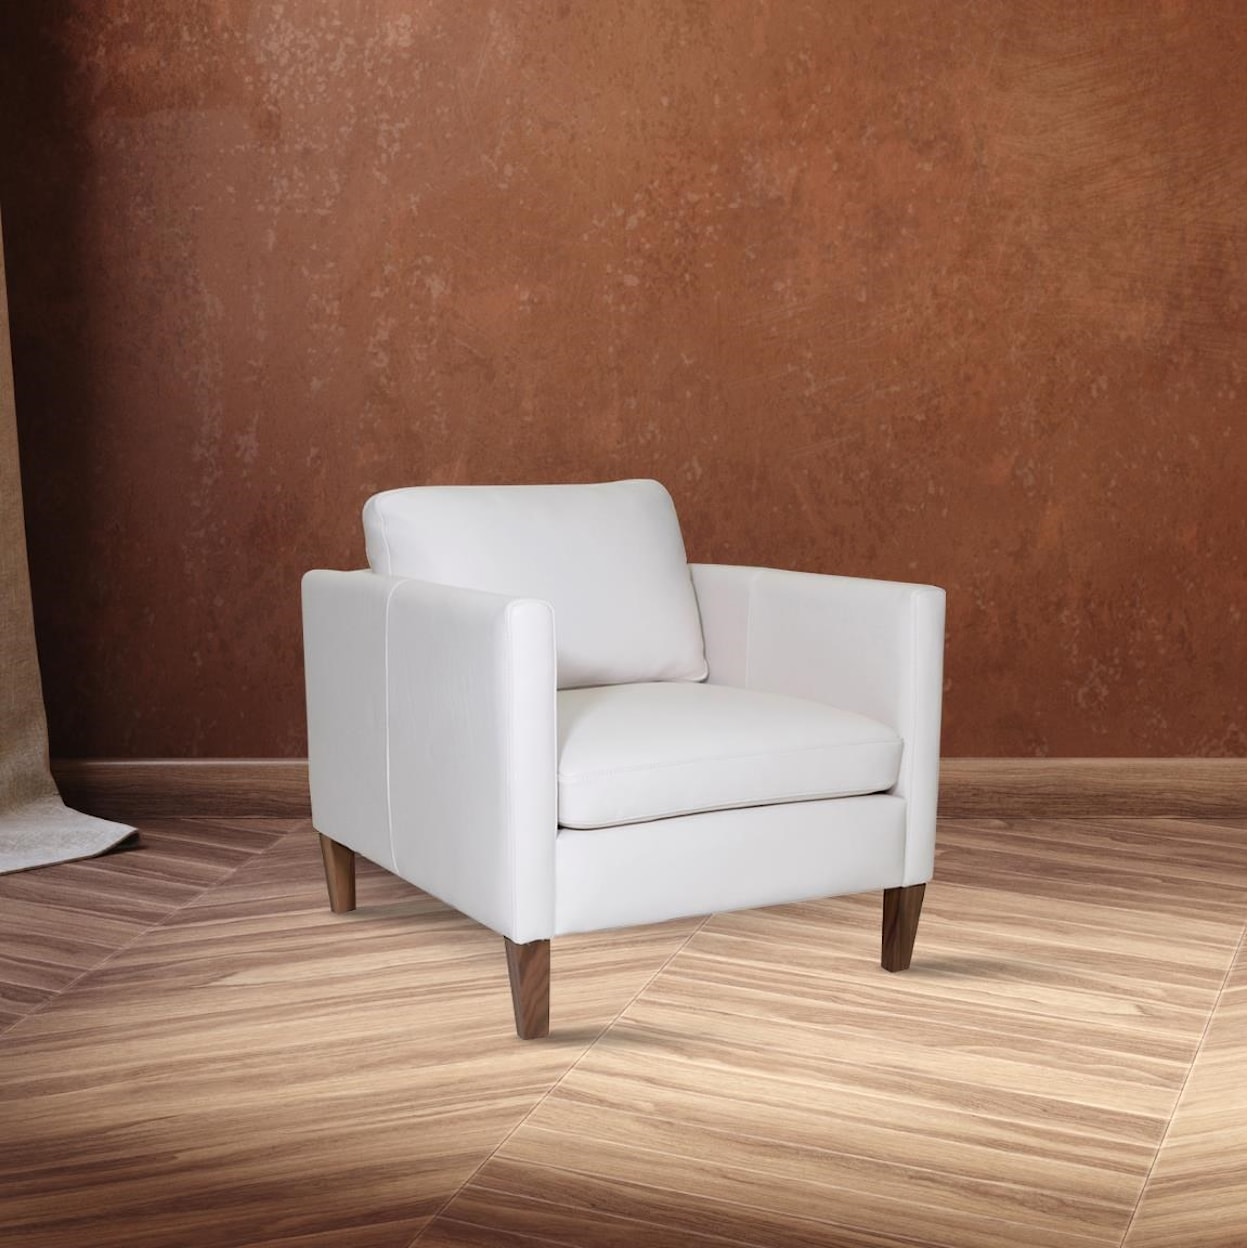 American Leather Milo Chair